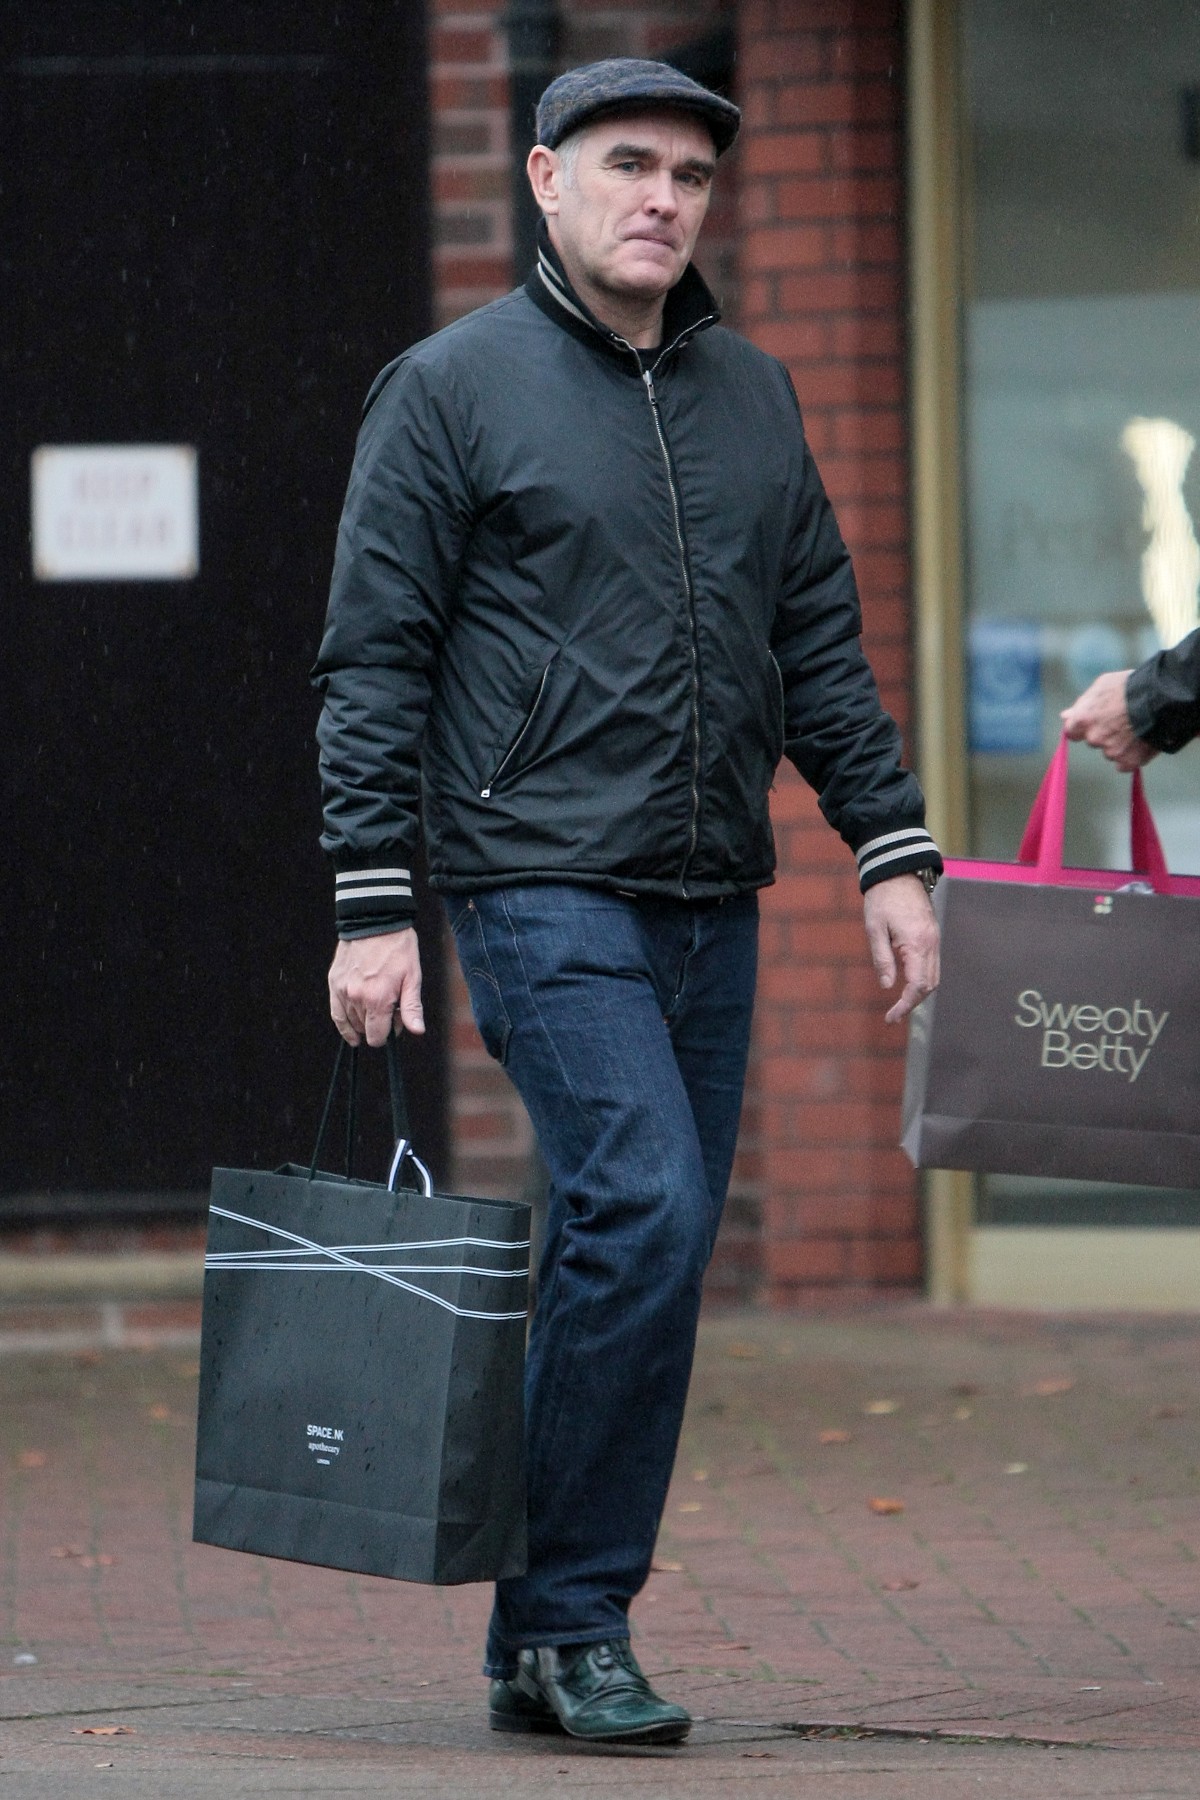 moz spotted shopping at Space NK 9th Nov 2012